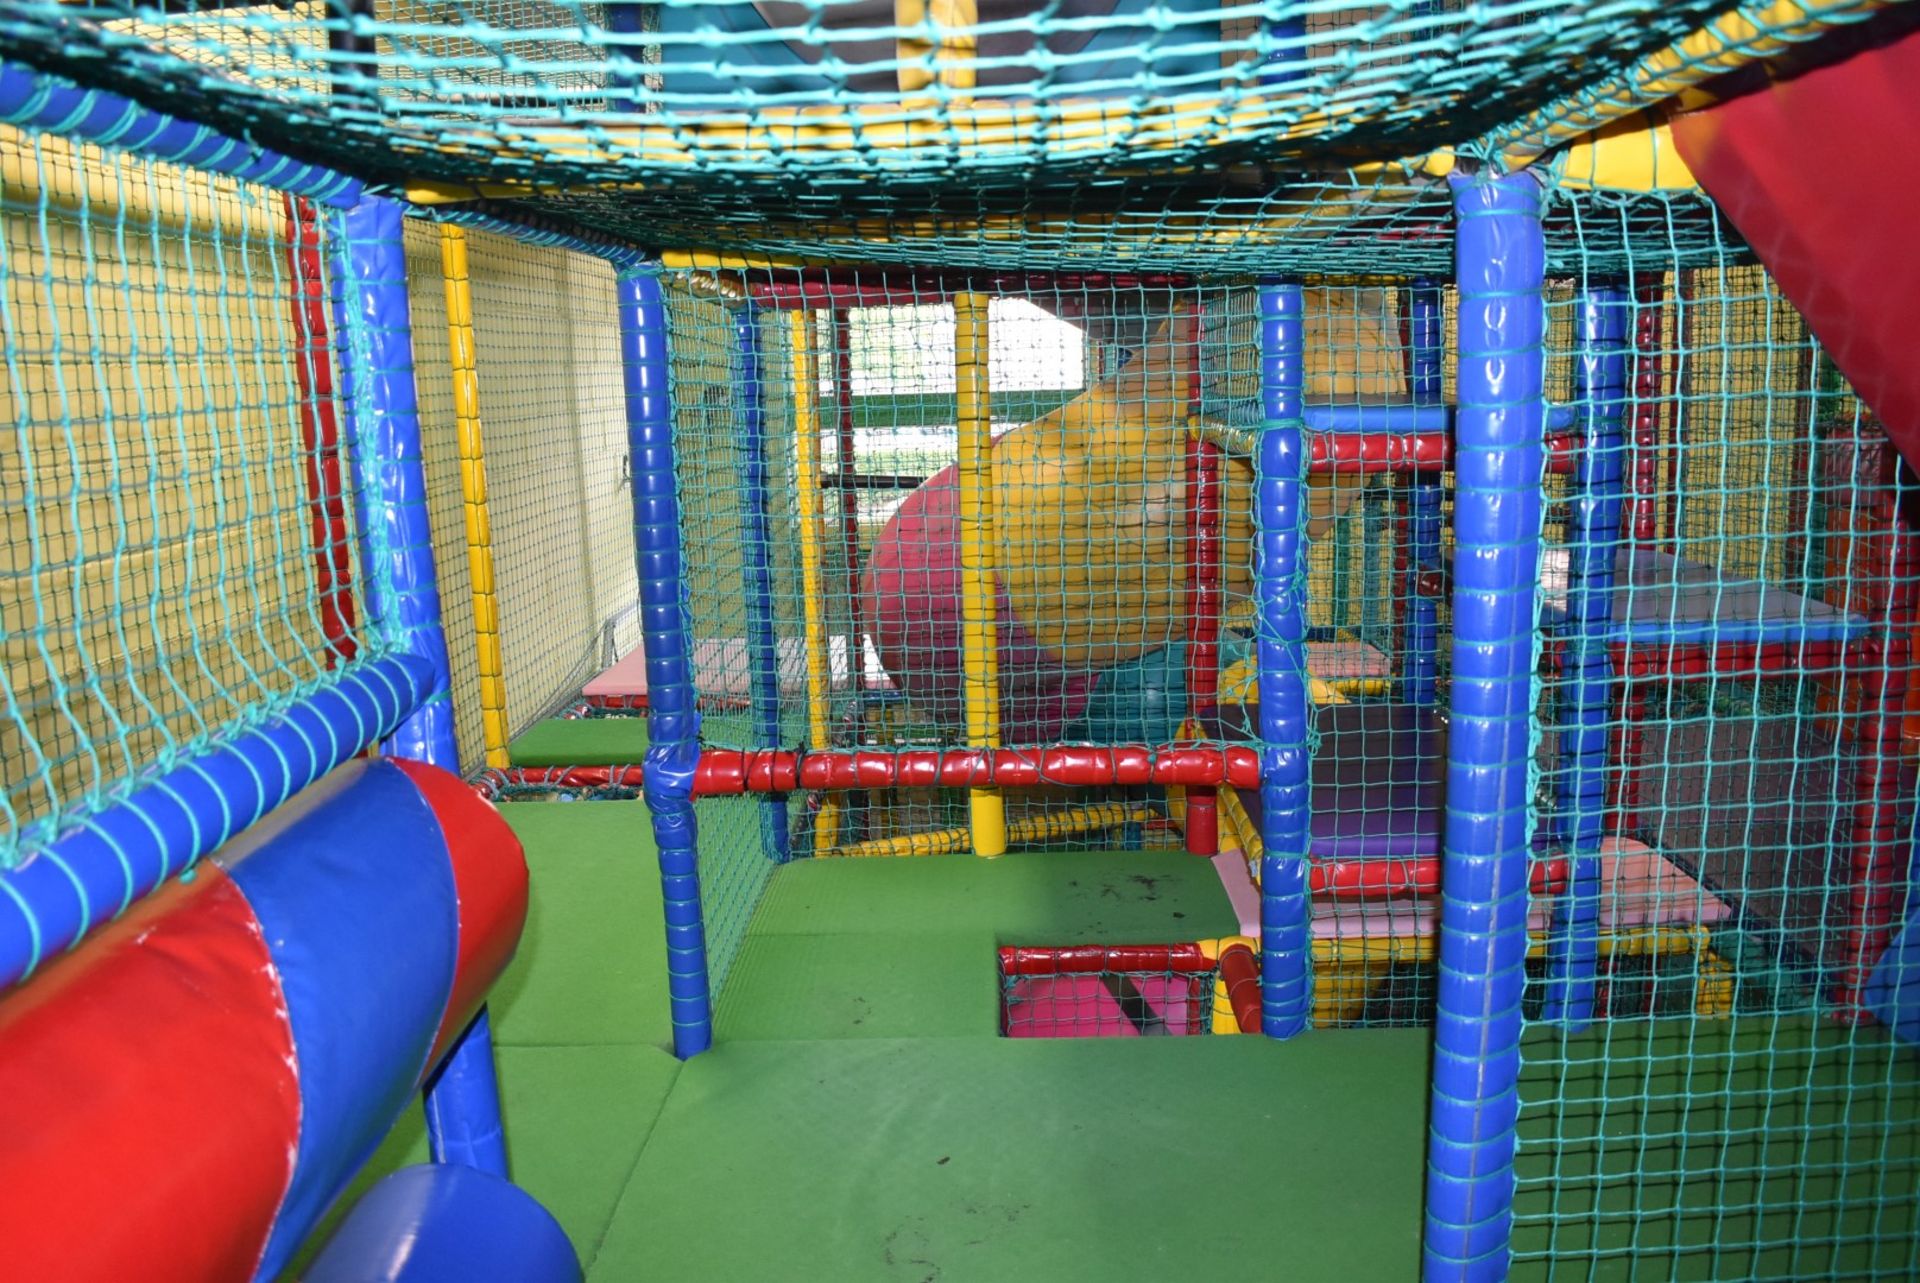 Bramleys Big Adventure Playground - Giant Action-Packed Playcentre With Slides, Zip Line Swings, - Image 51 of 128